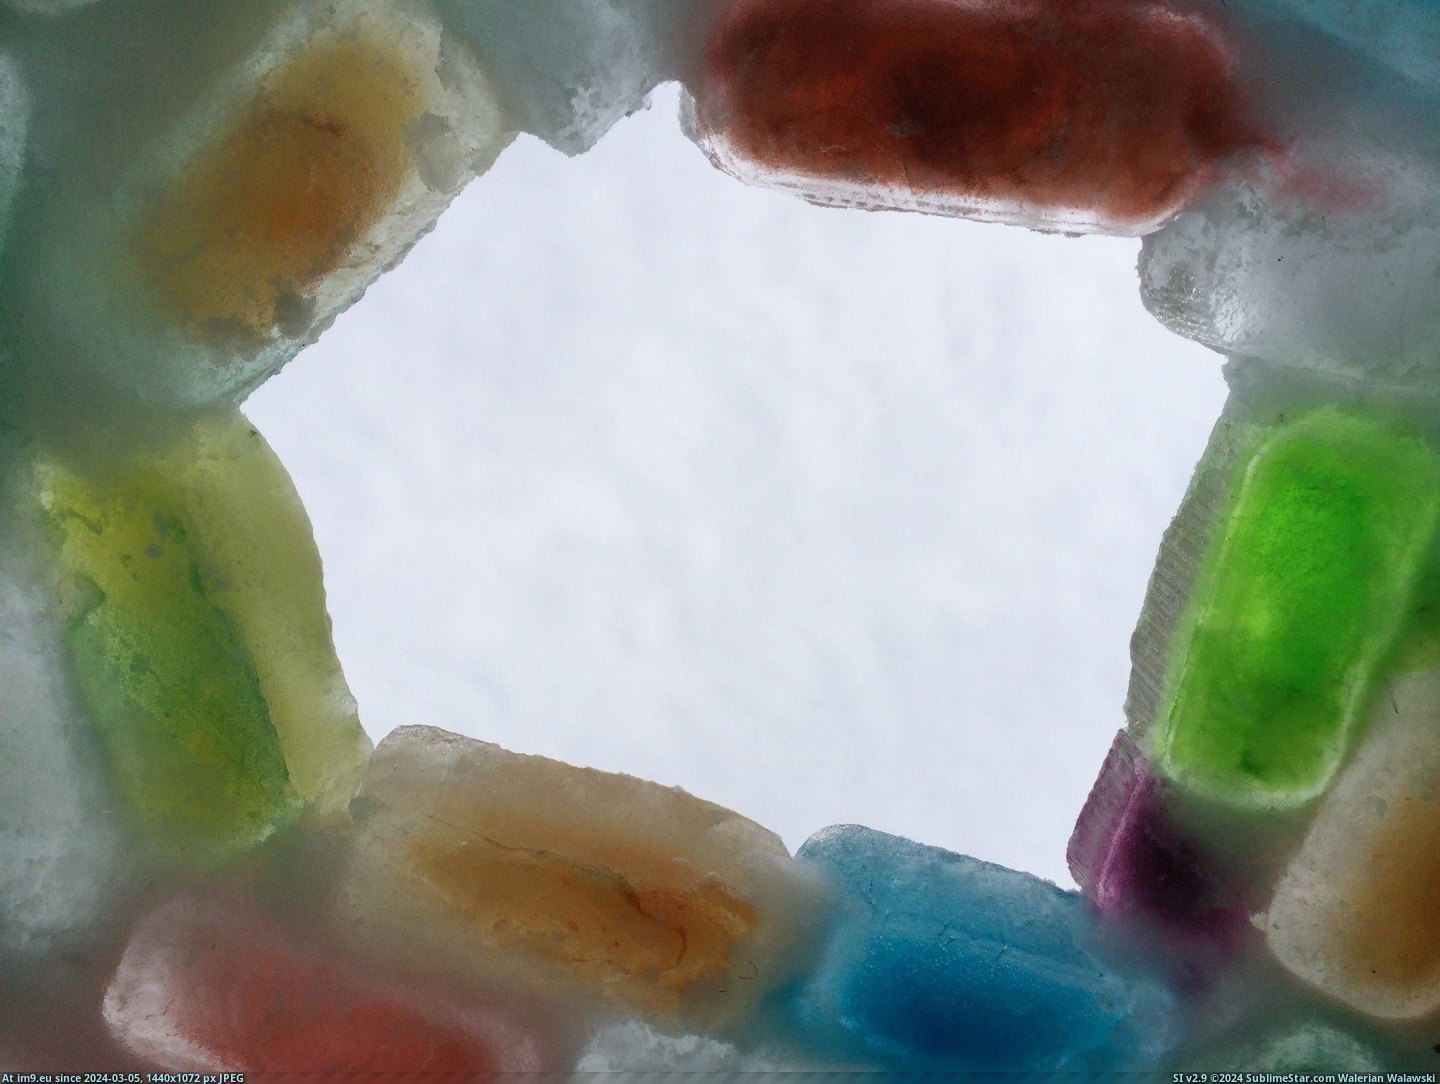 #Year #Ago #Making #Polar #Gem #Vortex #Igloo #Awesome #Family #Inspired [Pics] Inspired by a reddit post about a year ago, my family made the most of the Polar Vortex by making this awesome Gem Igloo  Pic. (Image of album My r/PICS favs))